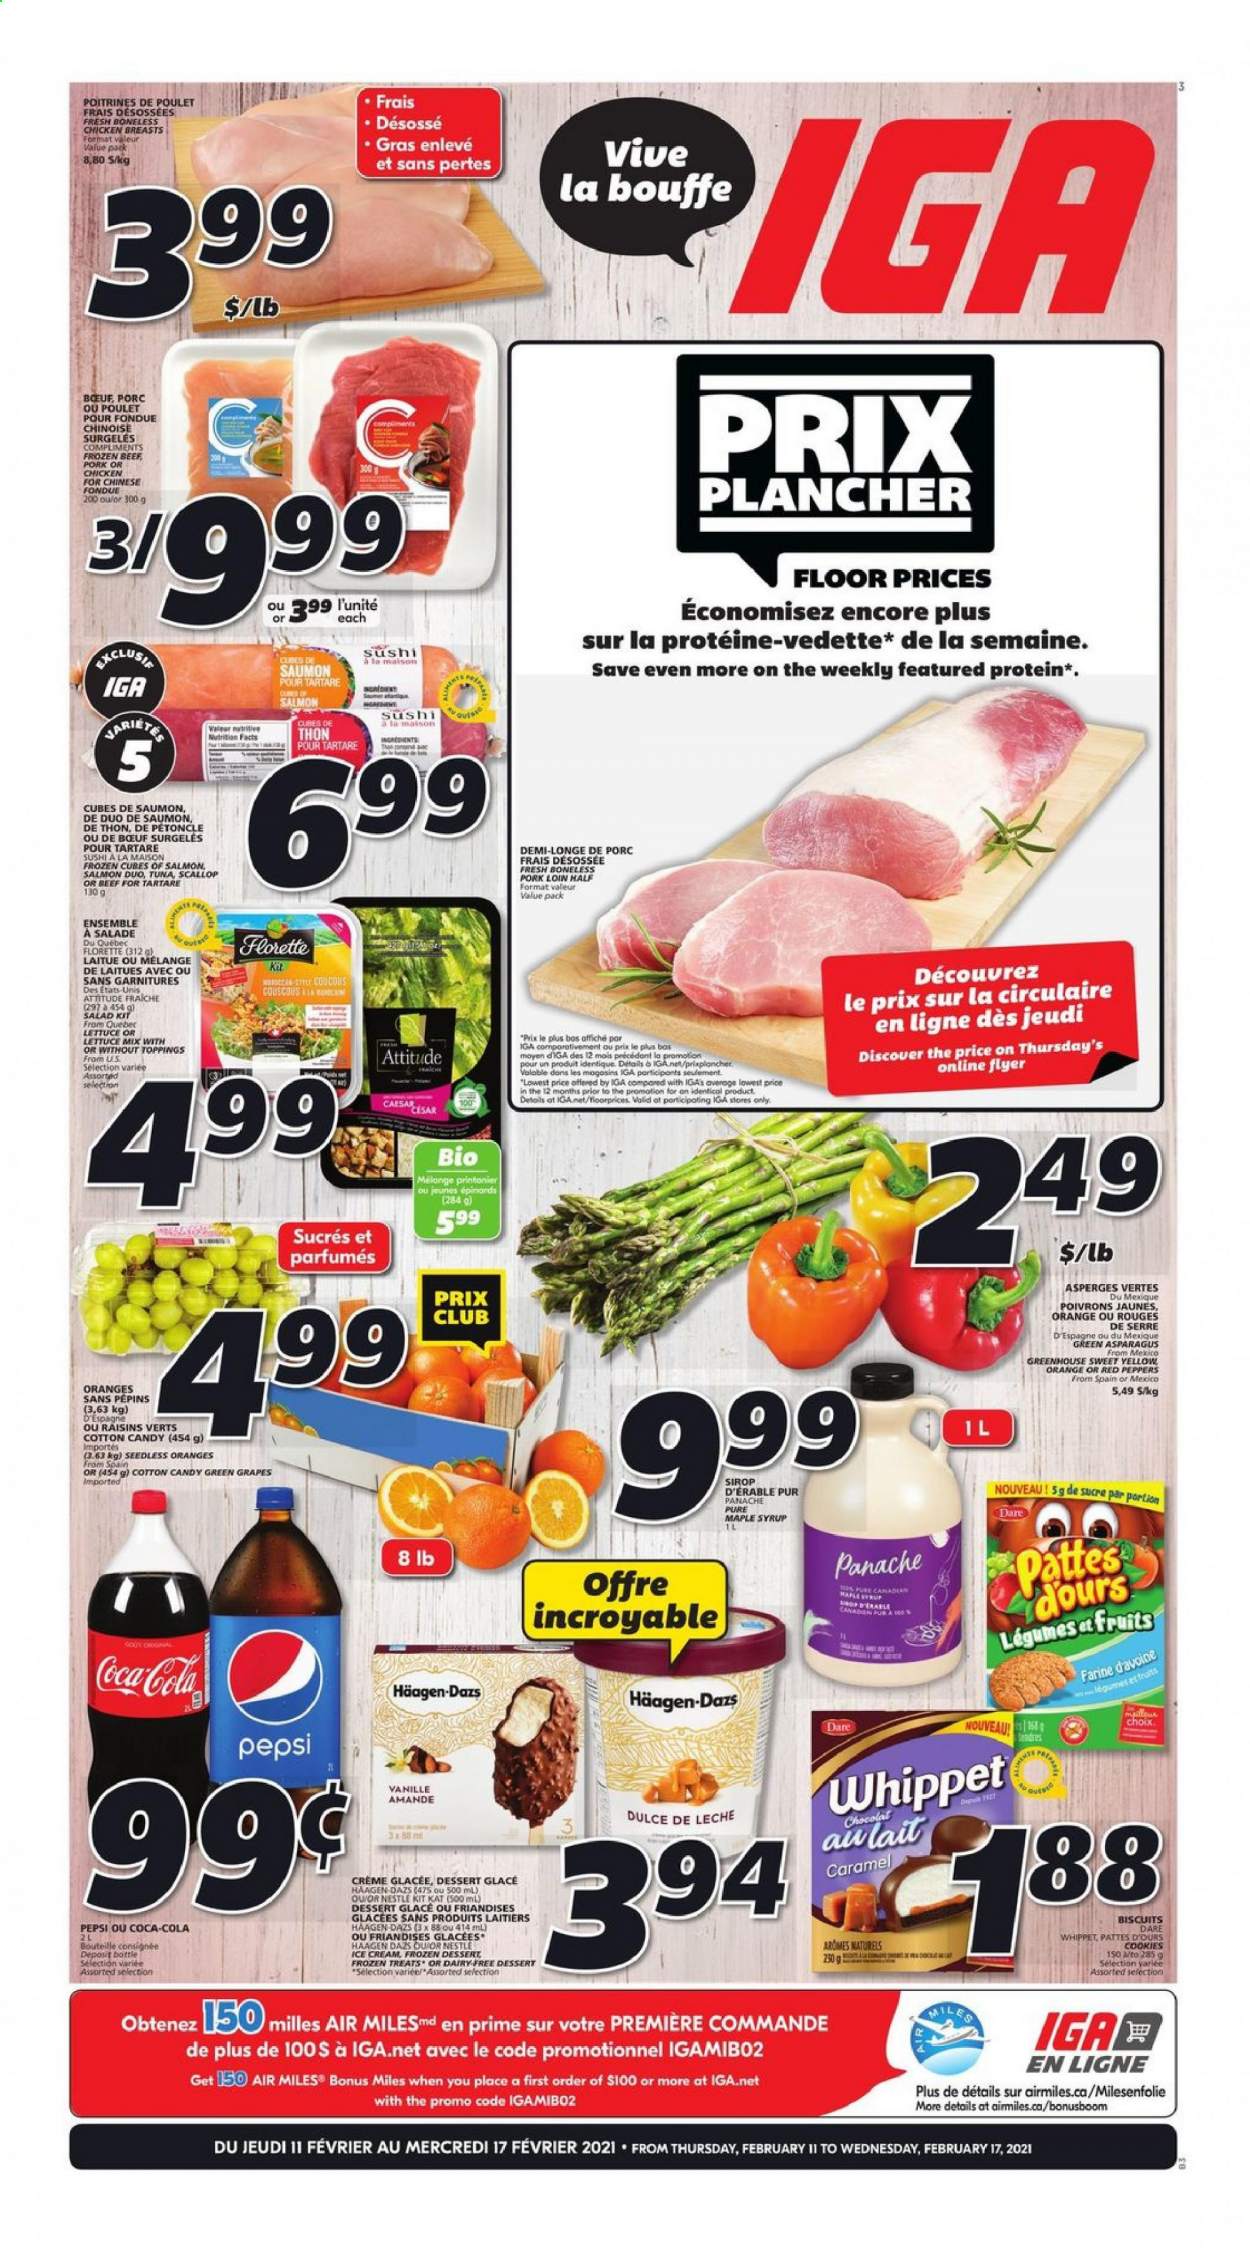 thumbnail - IGA Flyer - February 11, 2021 - February 17, 2021 - Sales products - asparagus, lettuce, salad, peppers, red peppers, grapes, salmon, scallops, ice cream, Häagen-Dazs, cookies, KitKat, cotton candy, biscuit, caramel, maple syrup, syrup, dried fruit, Coca-Cola, Pepsi, chicken breasts, pork loin, pork meat, Nestlé, raisins. Page 1.